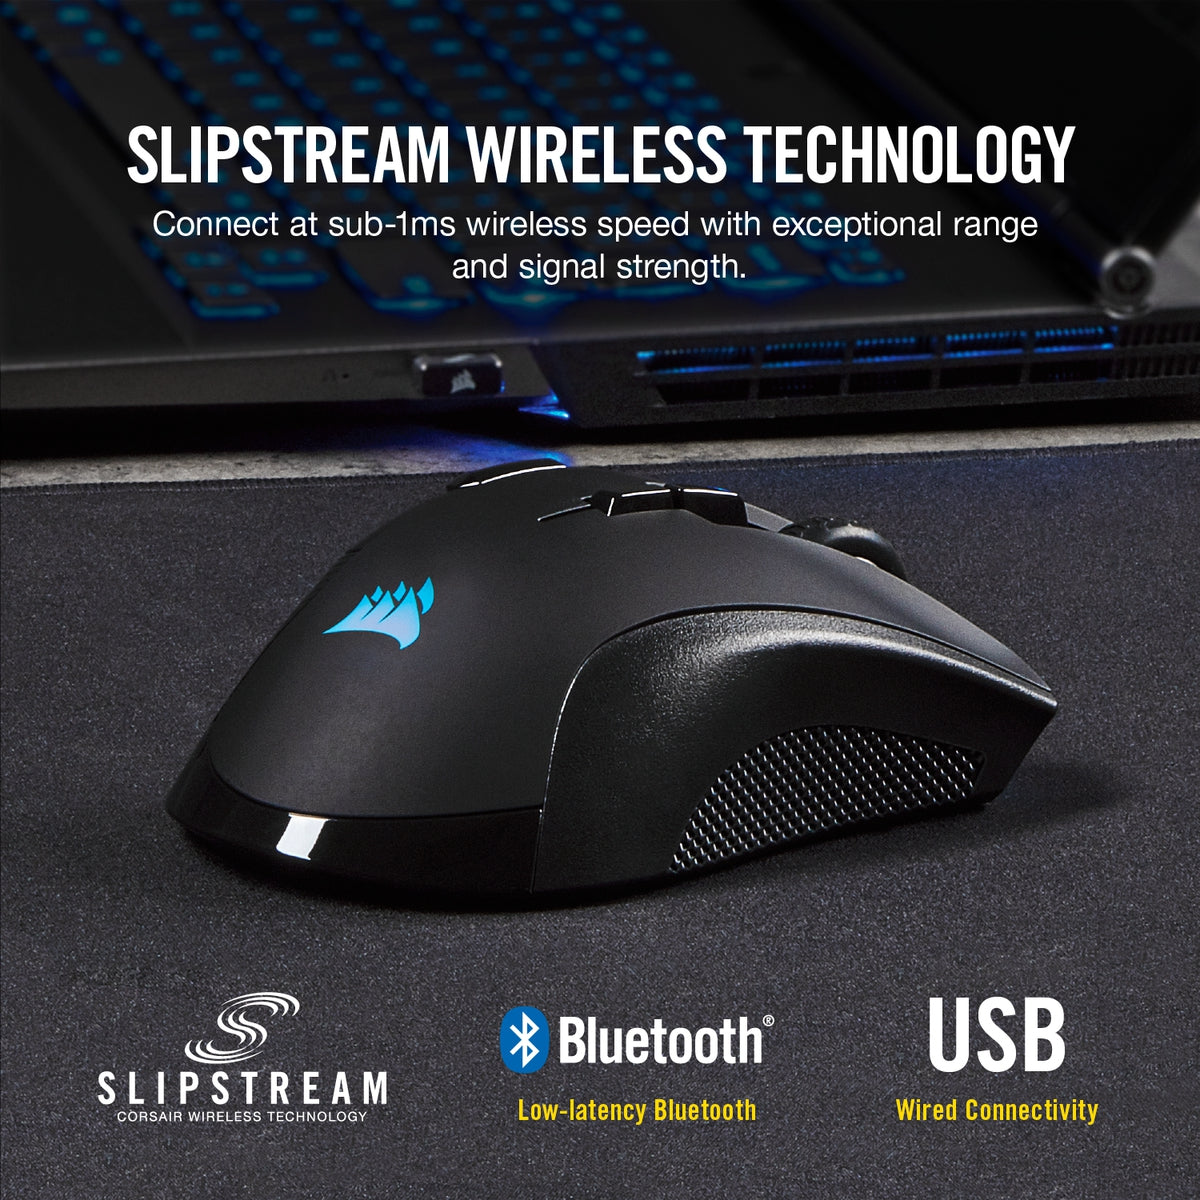 Mouse Corsair Gaming Ironclaw Rgb Wireless 18K Dpi Ch-9317011-Na